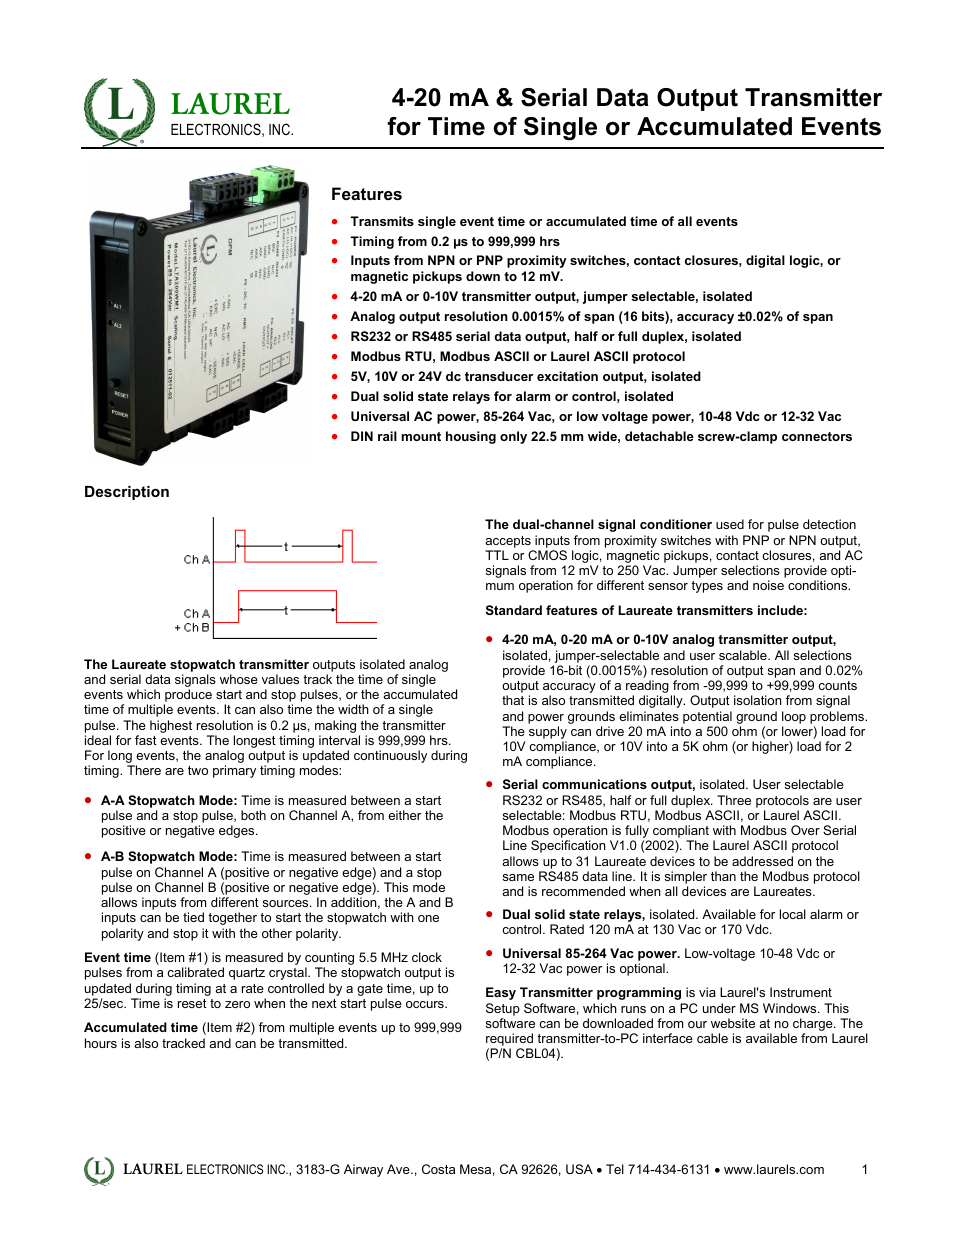 LT: 4-20 mA & Serial Data Output Transmitter for Time of Single or Accumulated Events